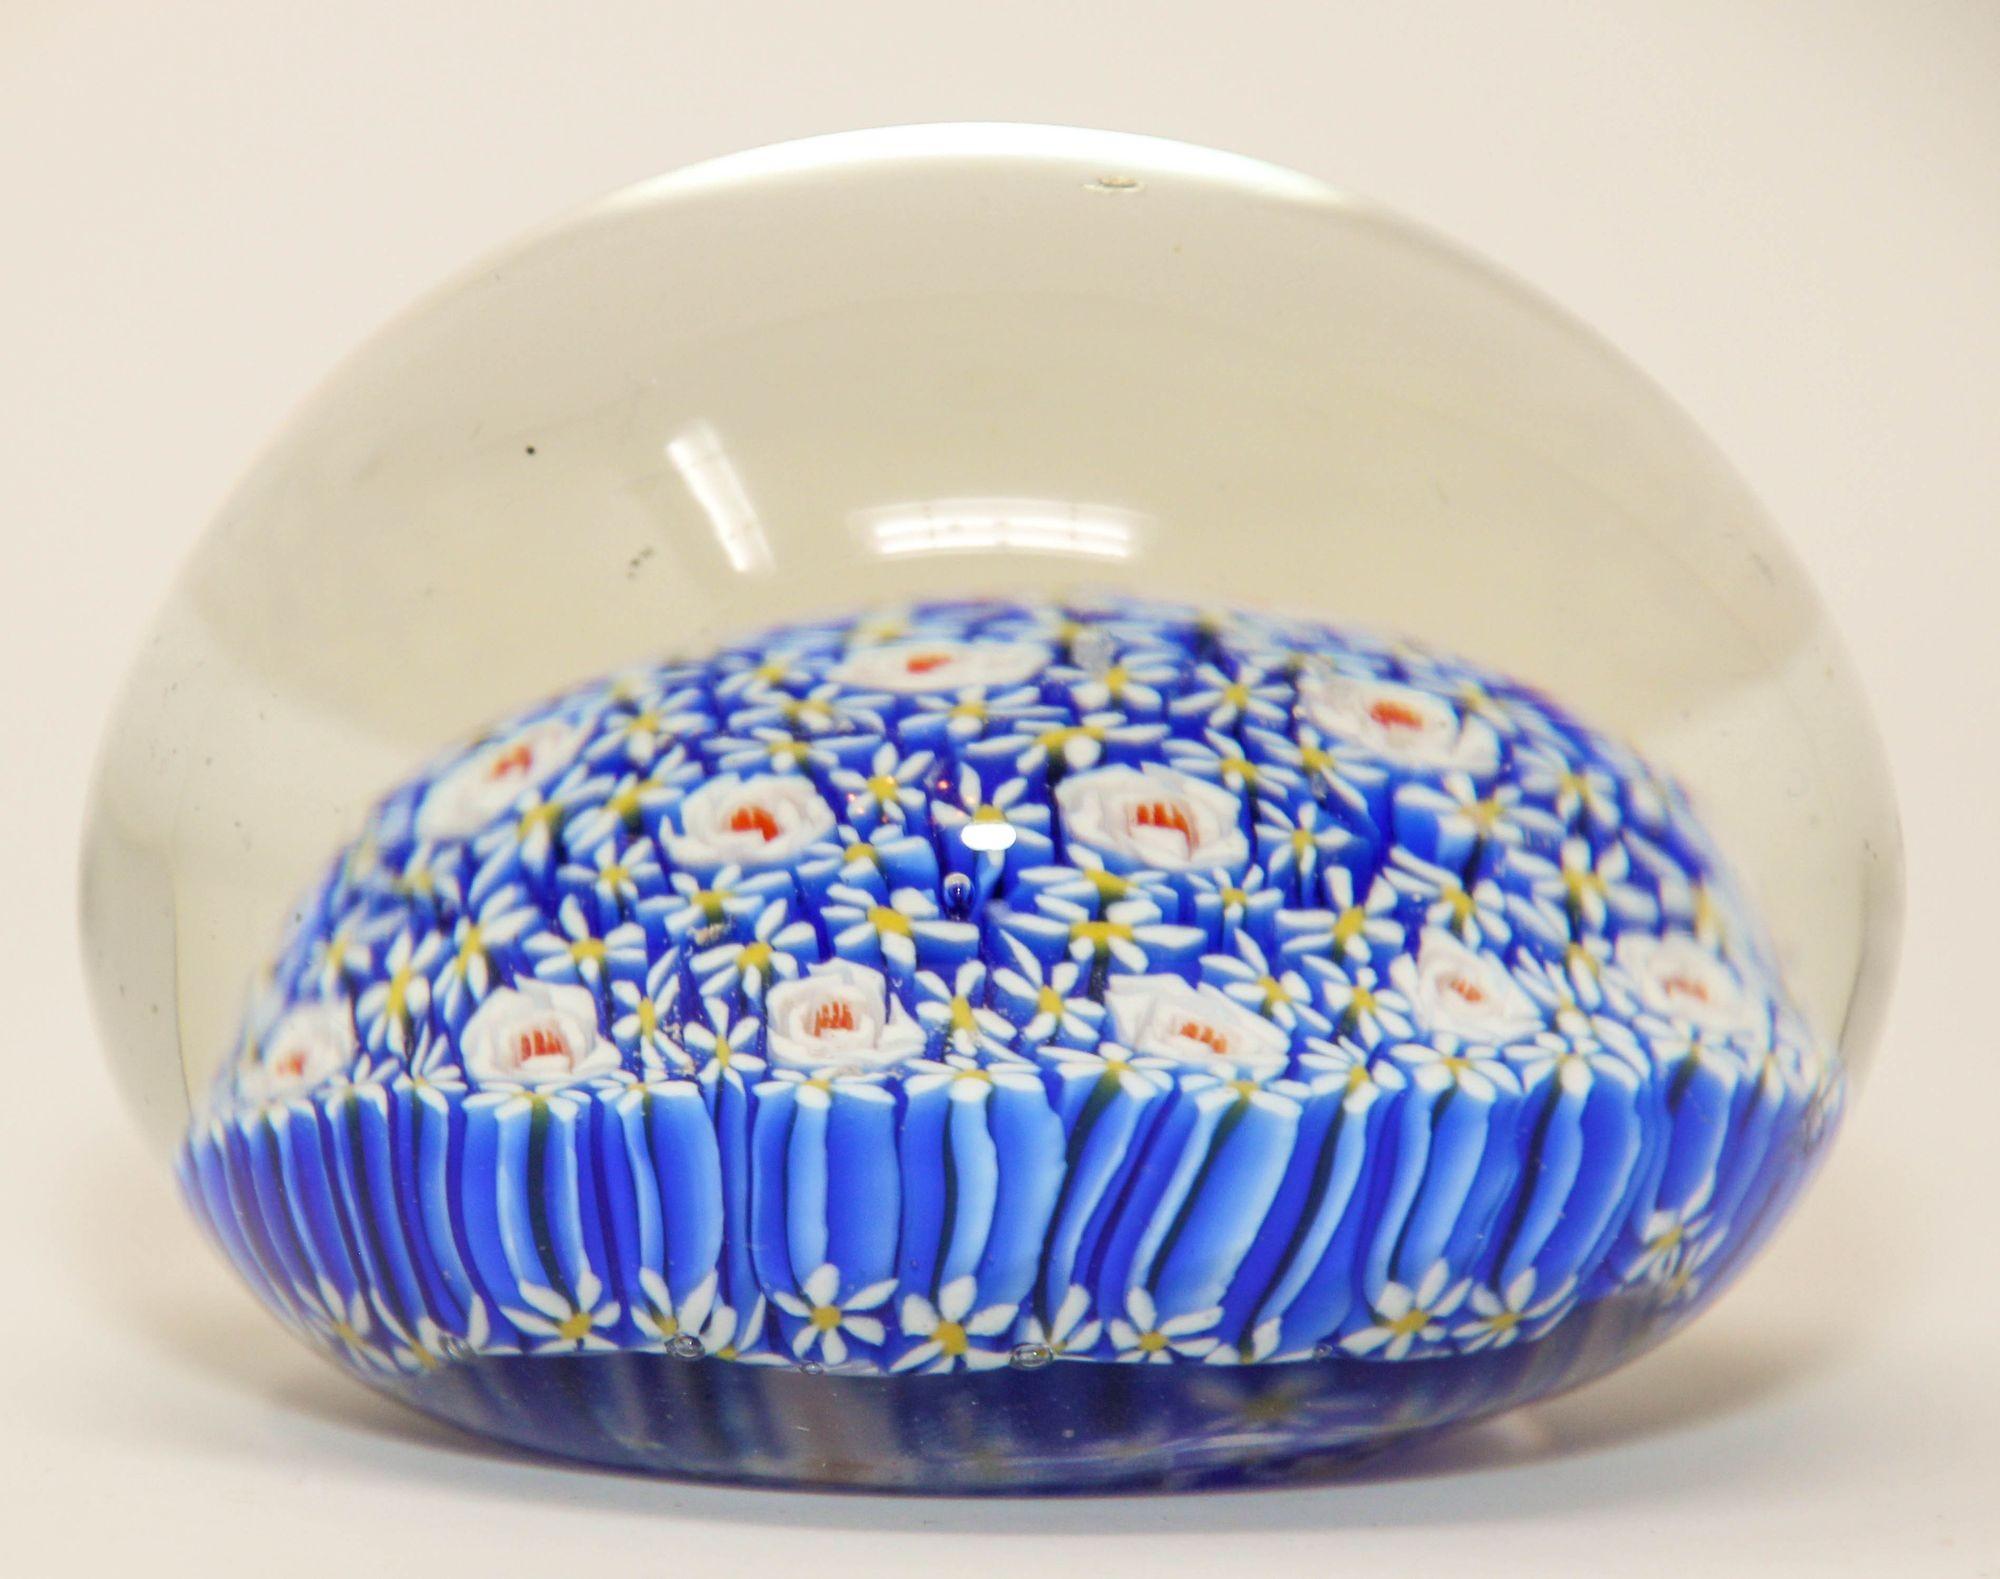 Small vintage Venini Murano glass collectable paper weight.
Beautiful Italian art glass paperweight in millefiori design in various shades of blue, white, with some reds, and yellows in clear case accenting the close concentric complex.
Murano